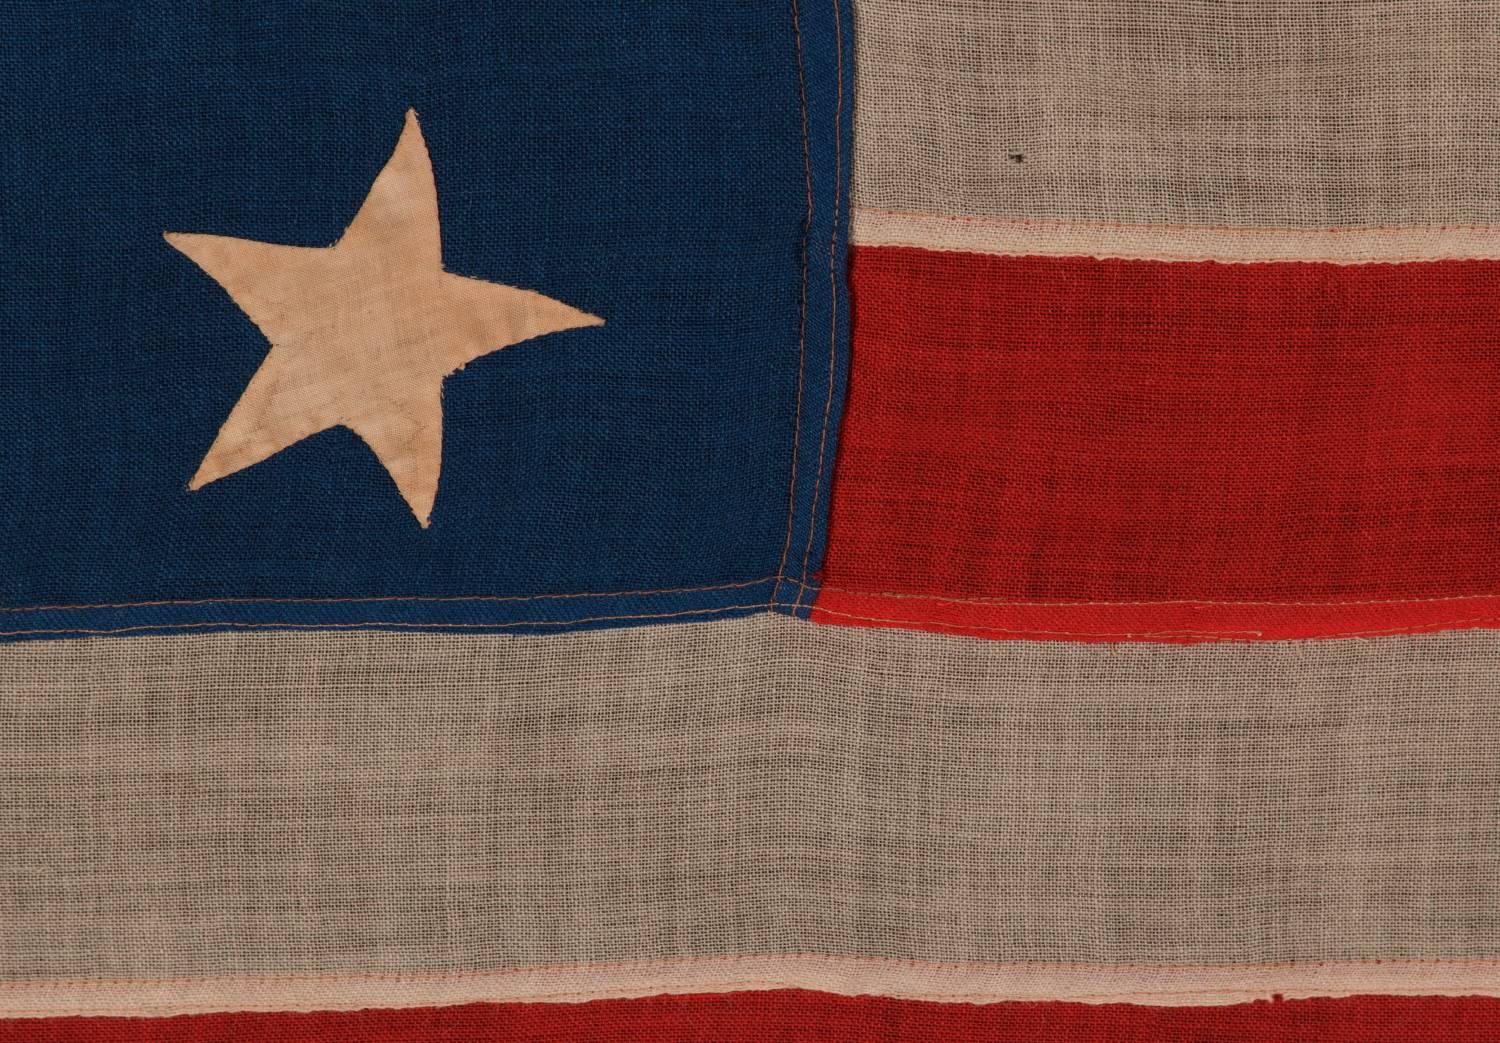 19th Century 13 Stars Hand-Sewn Antique American Flag, with Stars in a 3-2-3-2-3 Pattern